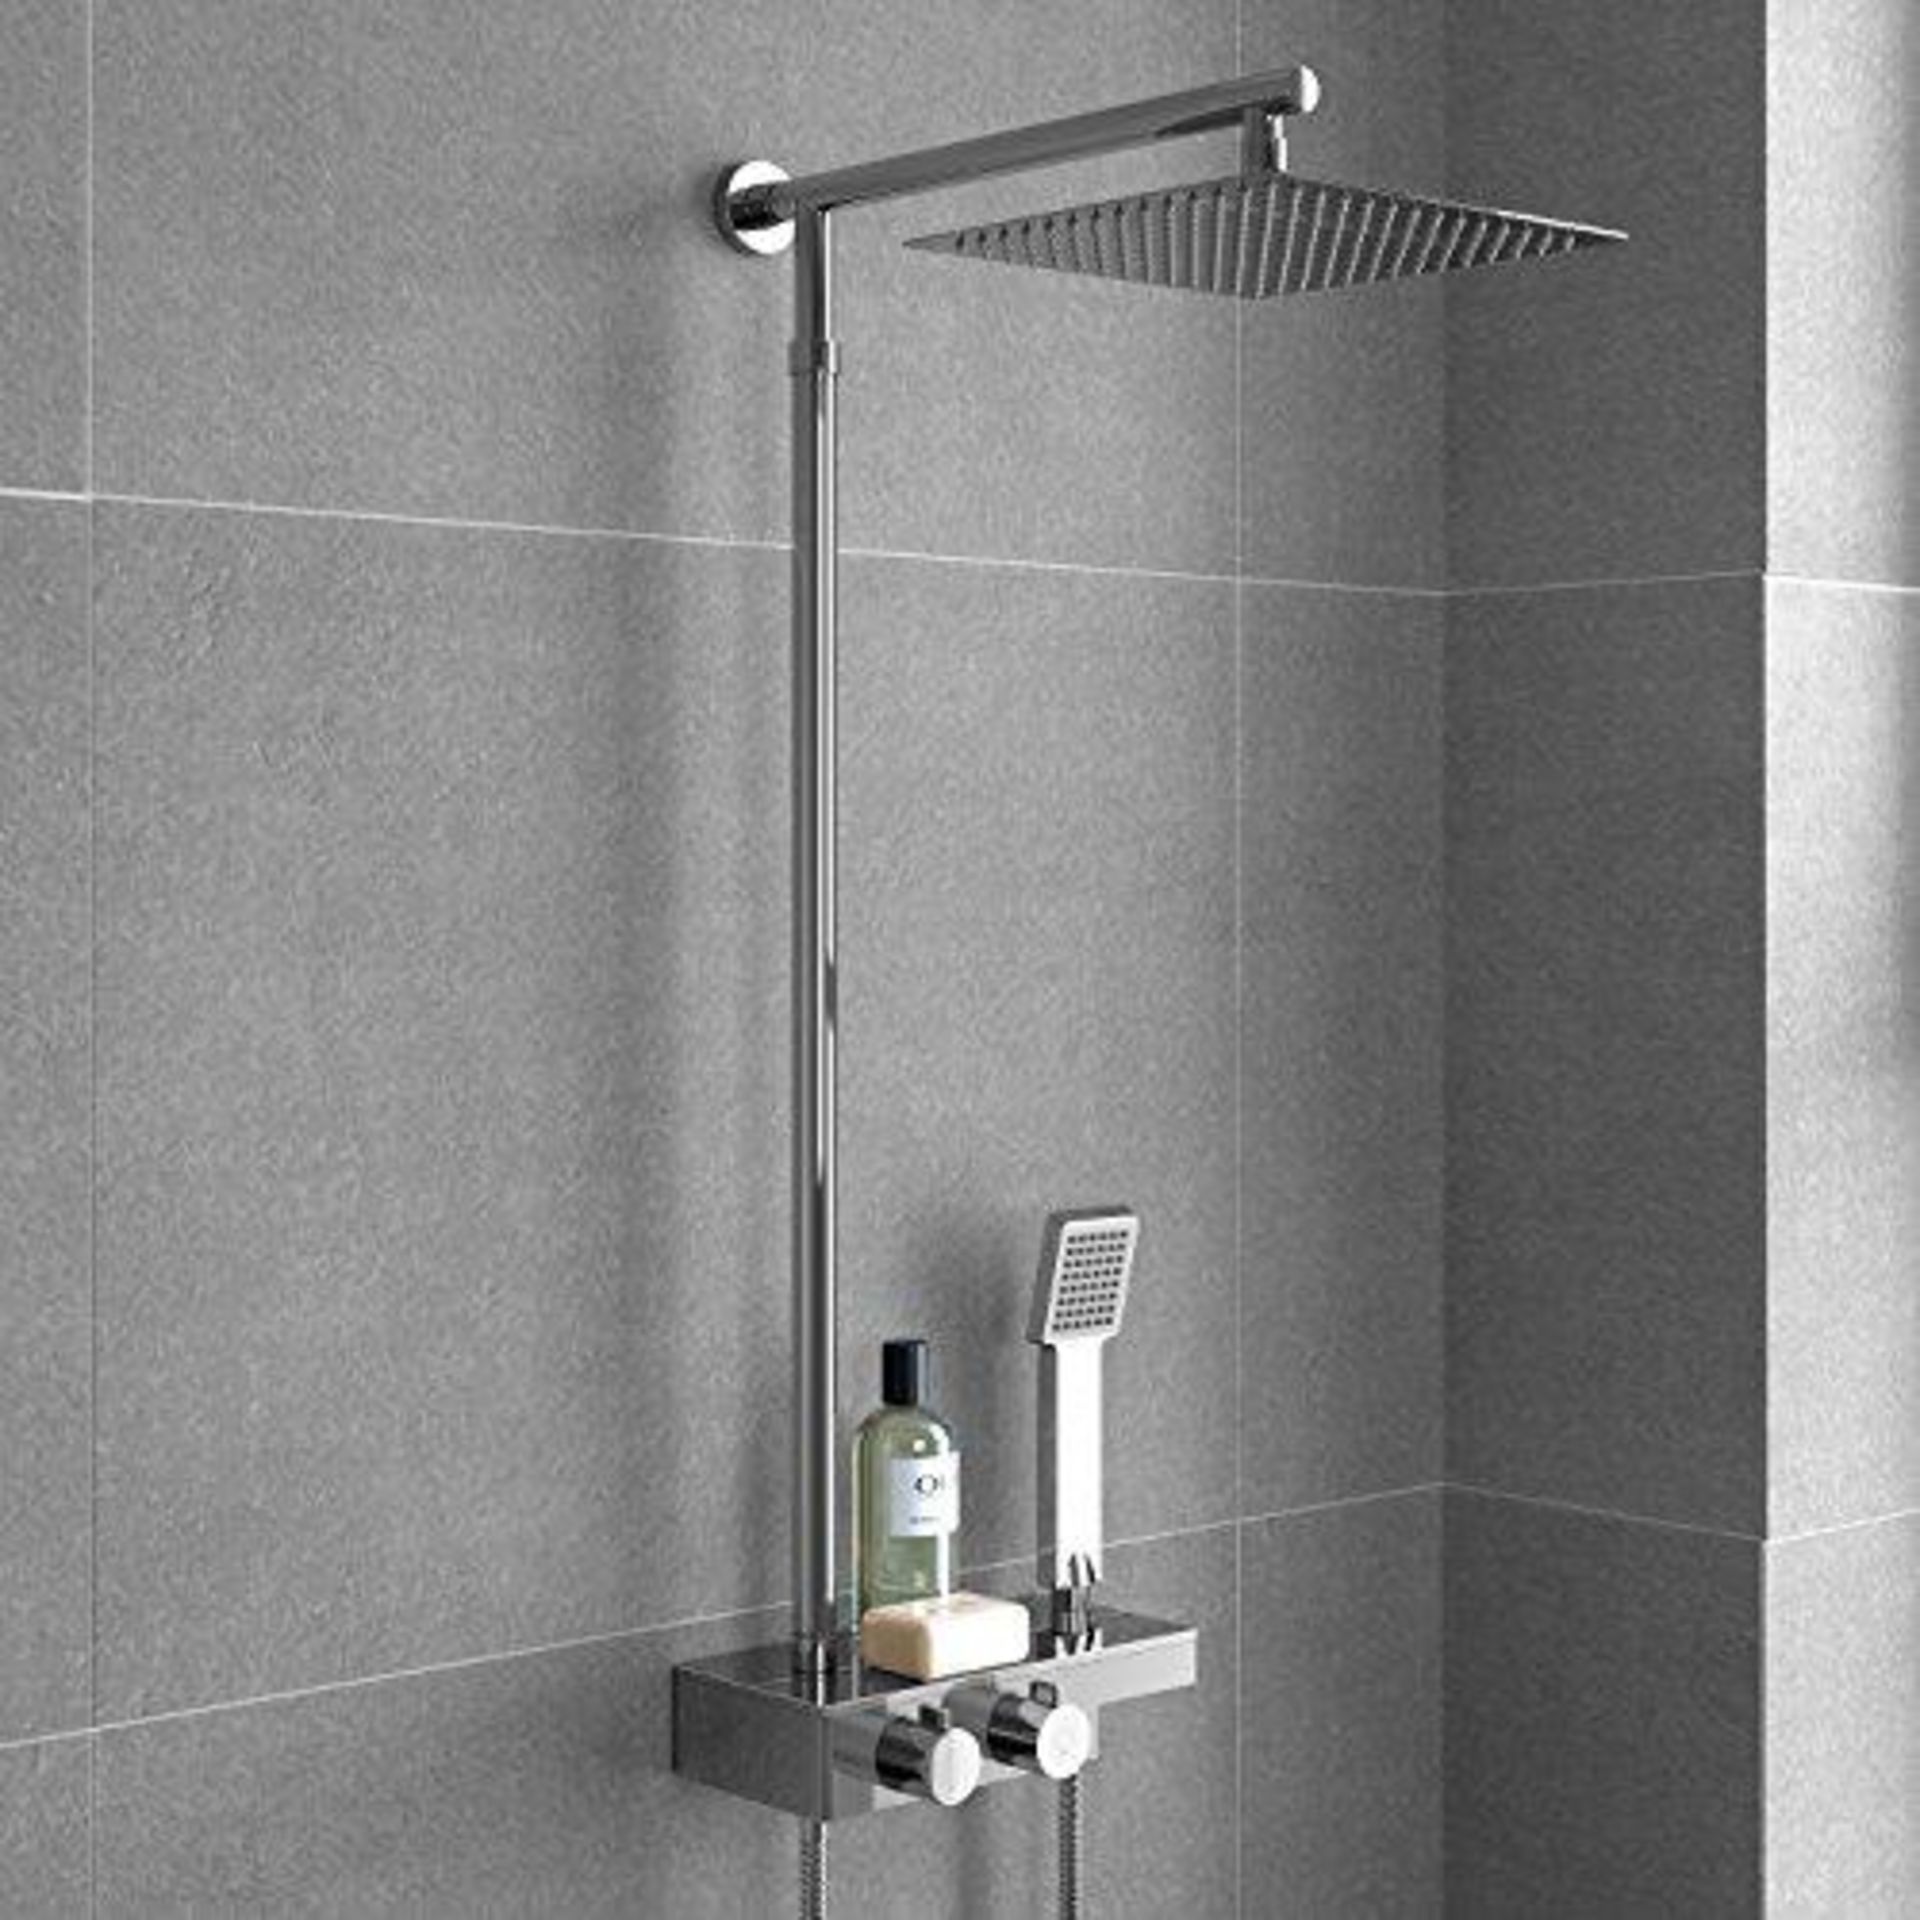 New & Boxed Square Thermostatic Bar Mixer Shower Set Valve With Shelf 10" Head + Handset. RRP ... - Image 2 of 2